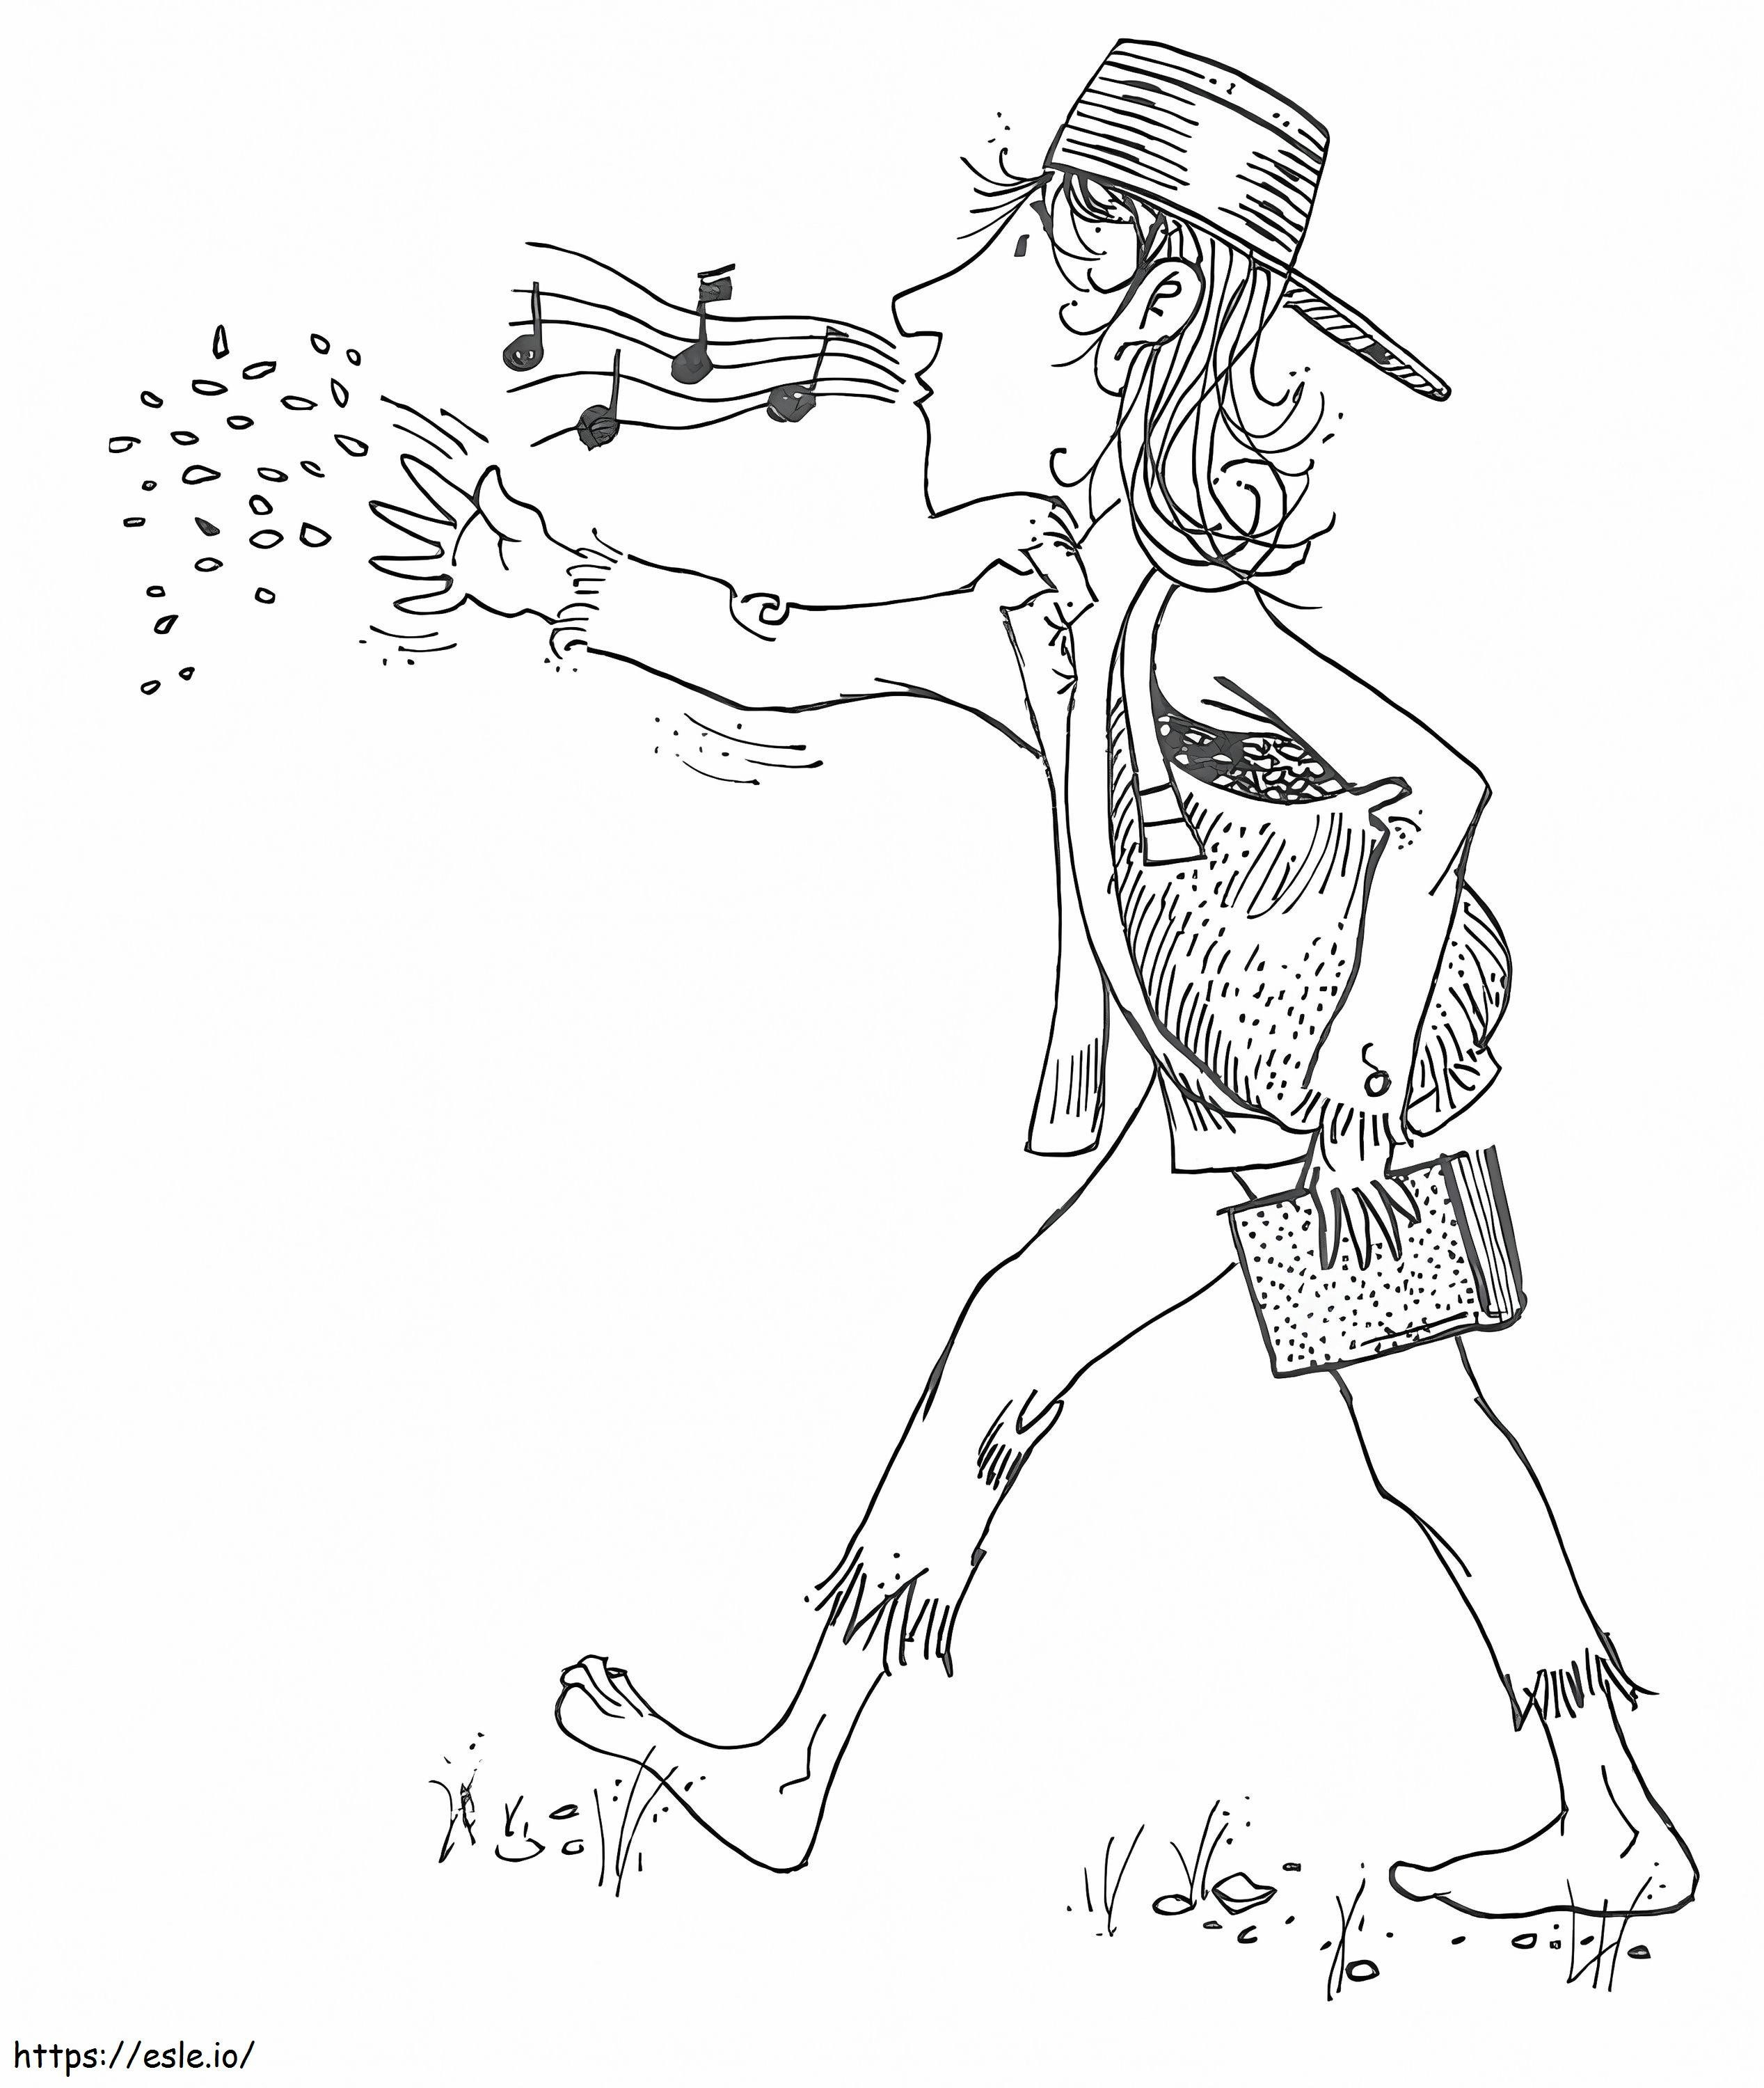 Free Johnny Appleseed coloring page